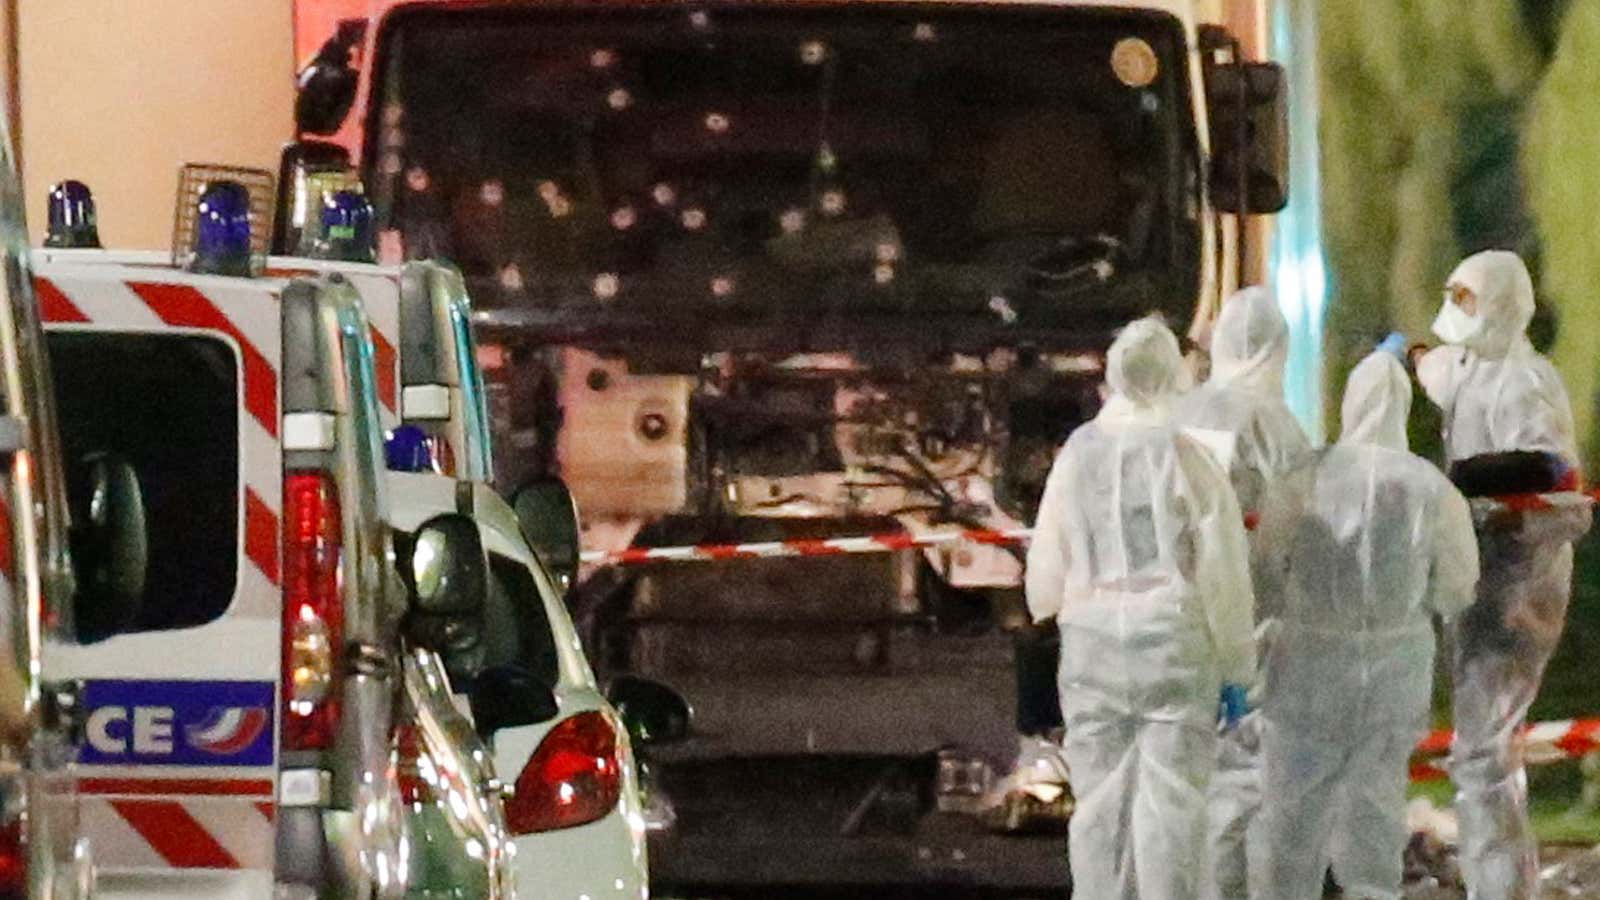 French authorities are examining the truck.